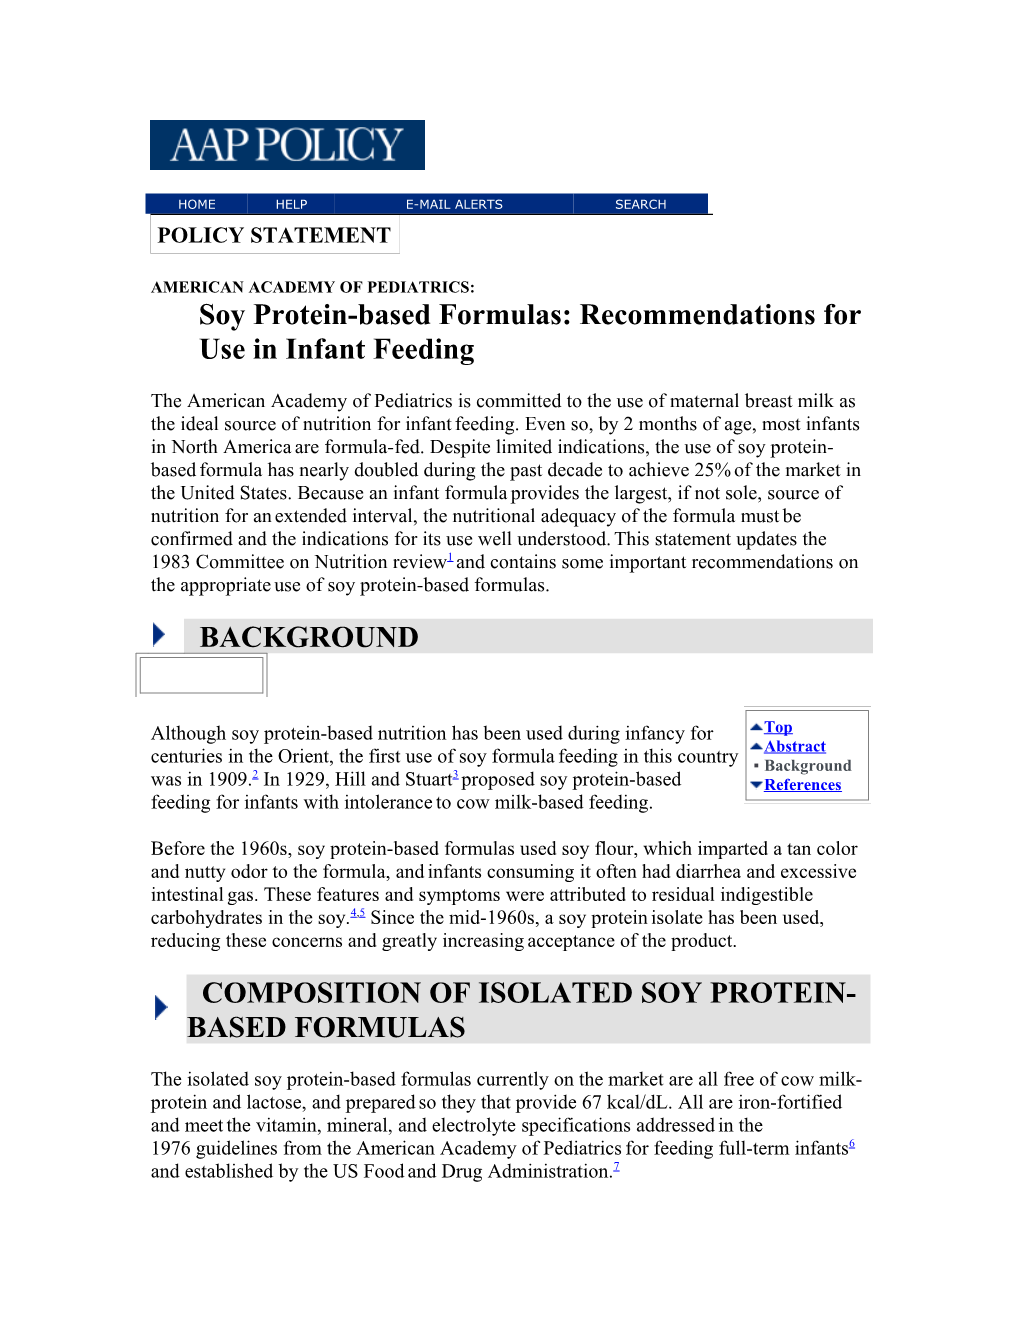 AMERICAN ACADEMY of PEDIATRICS:Soy Protein-Based Formulas: Recommendations for Use in Infant